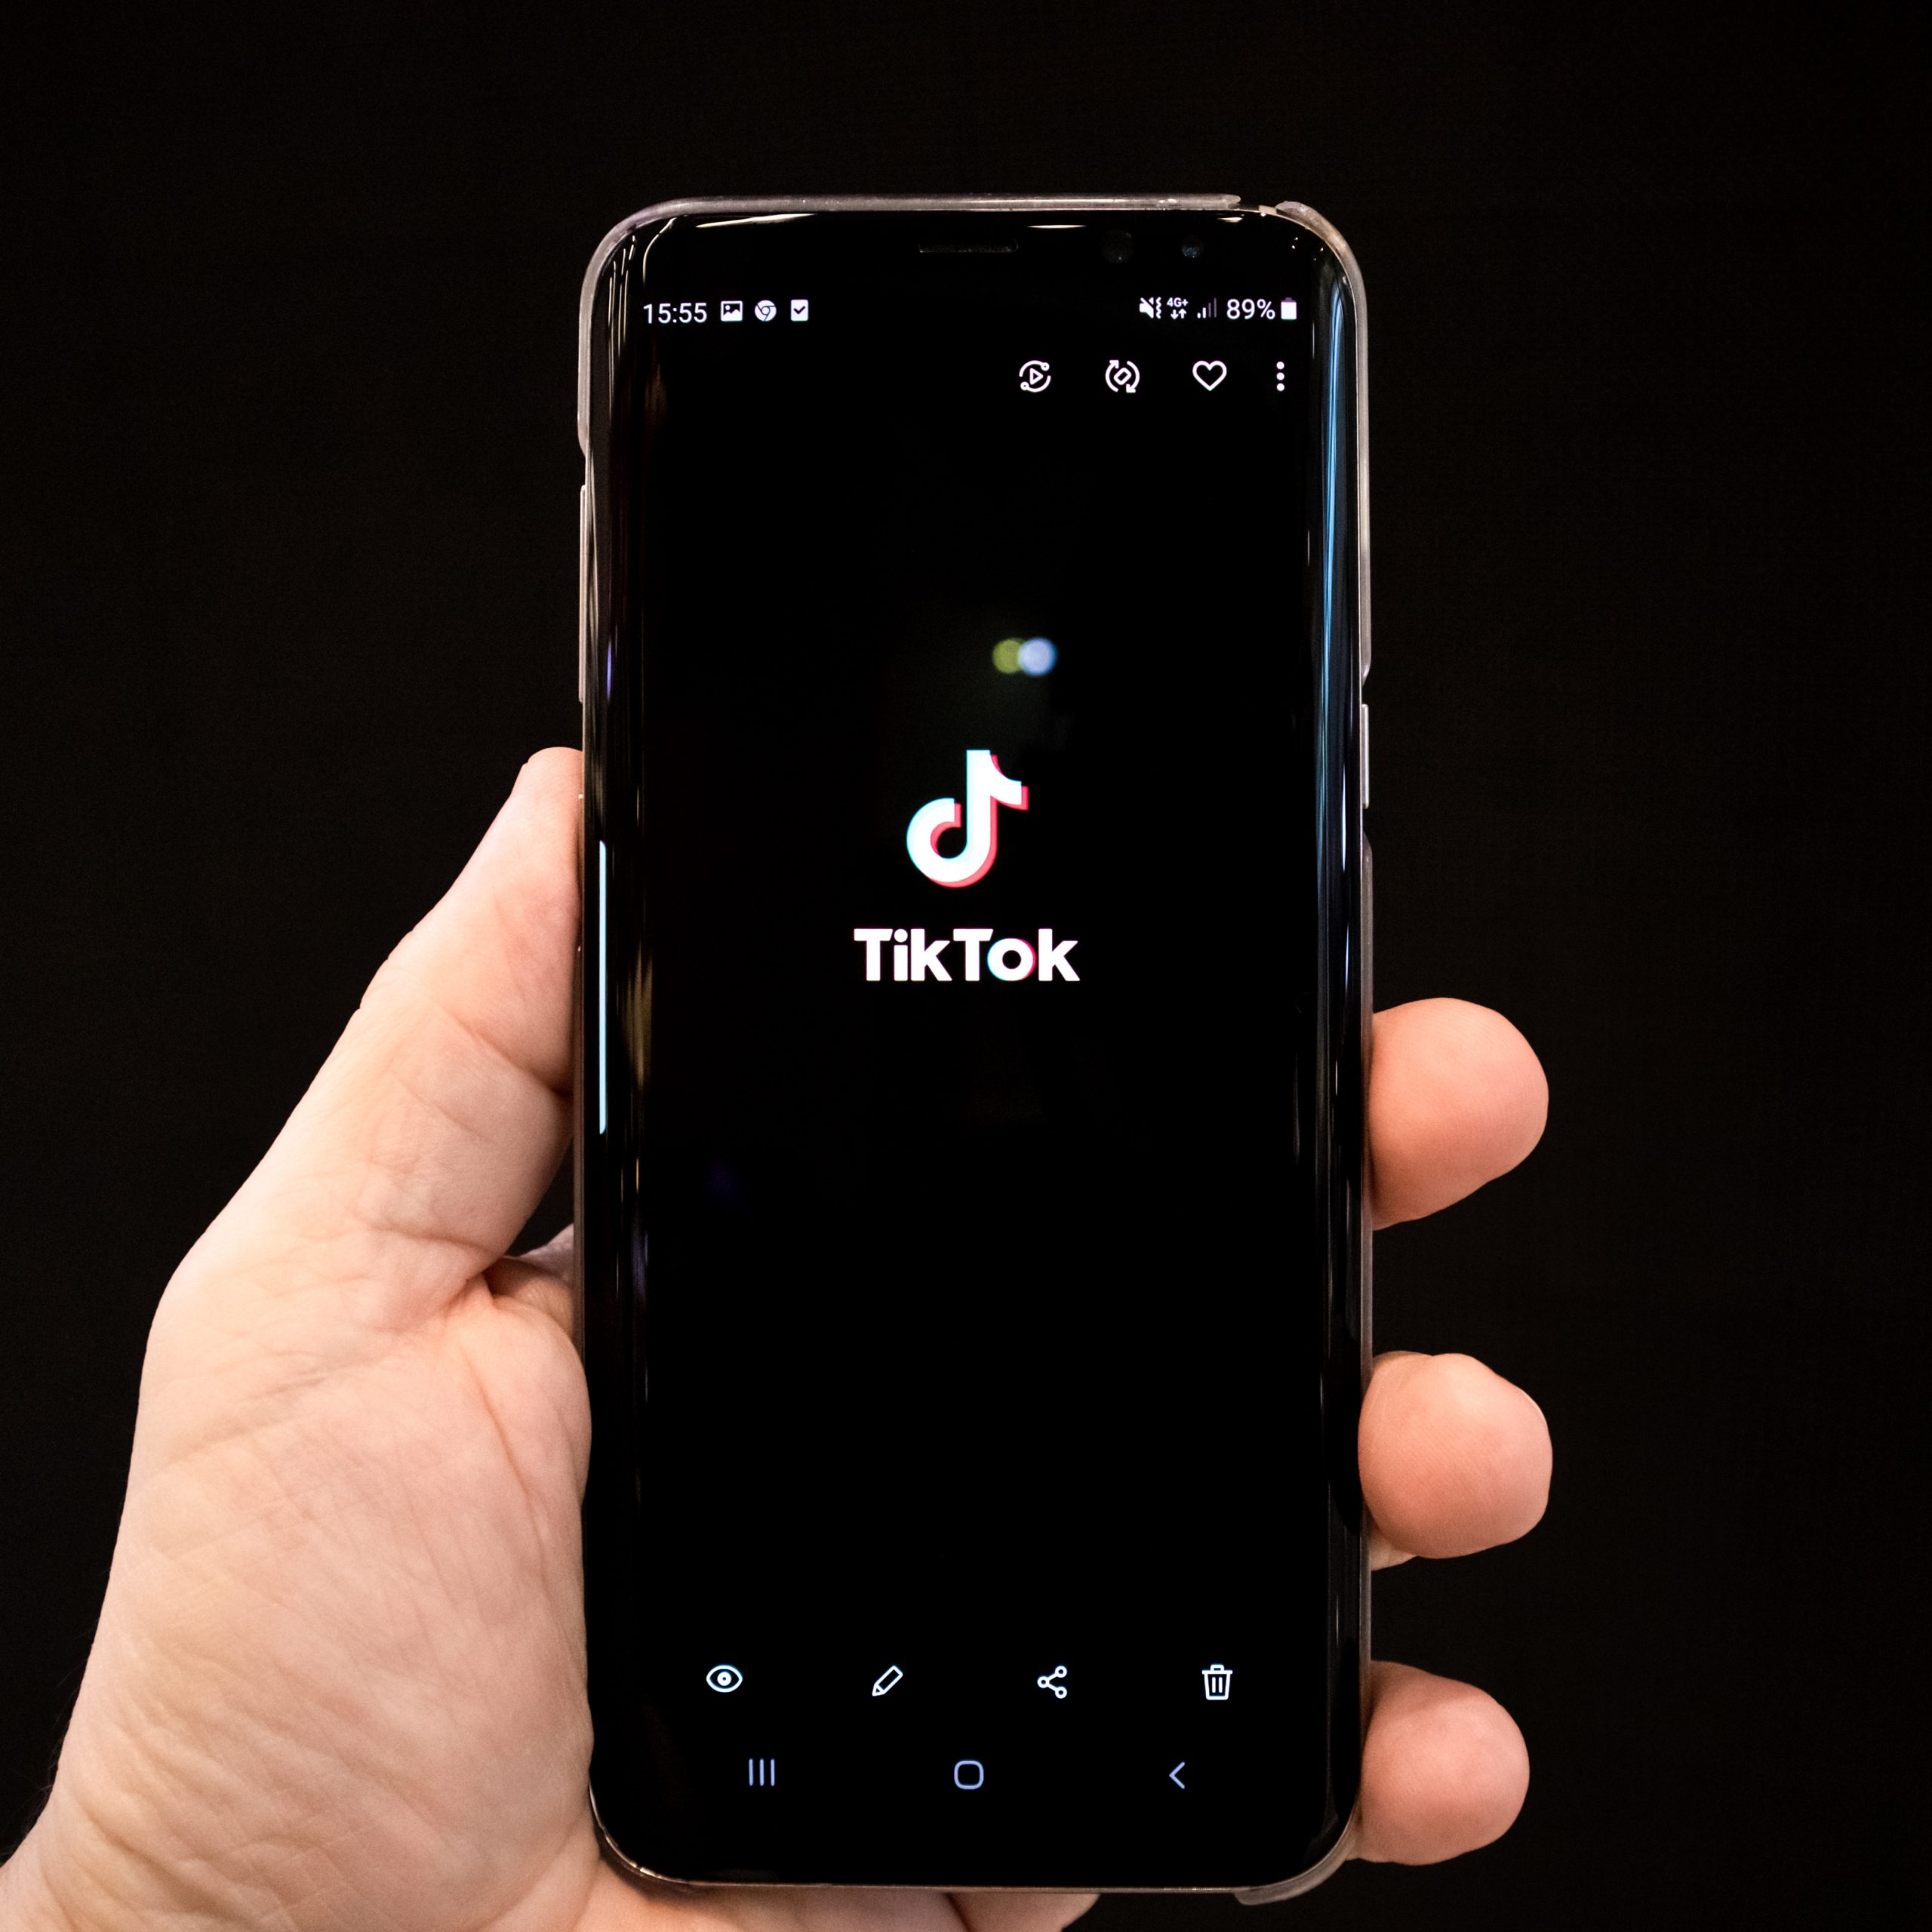 Best Practices for Going Live on TikTok